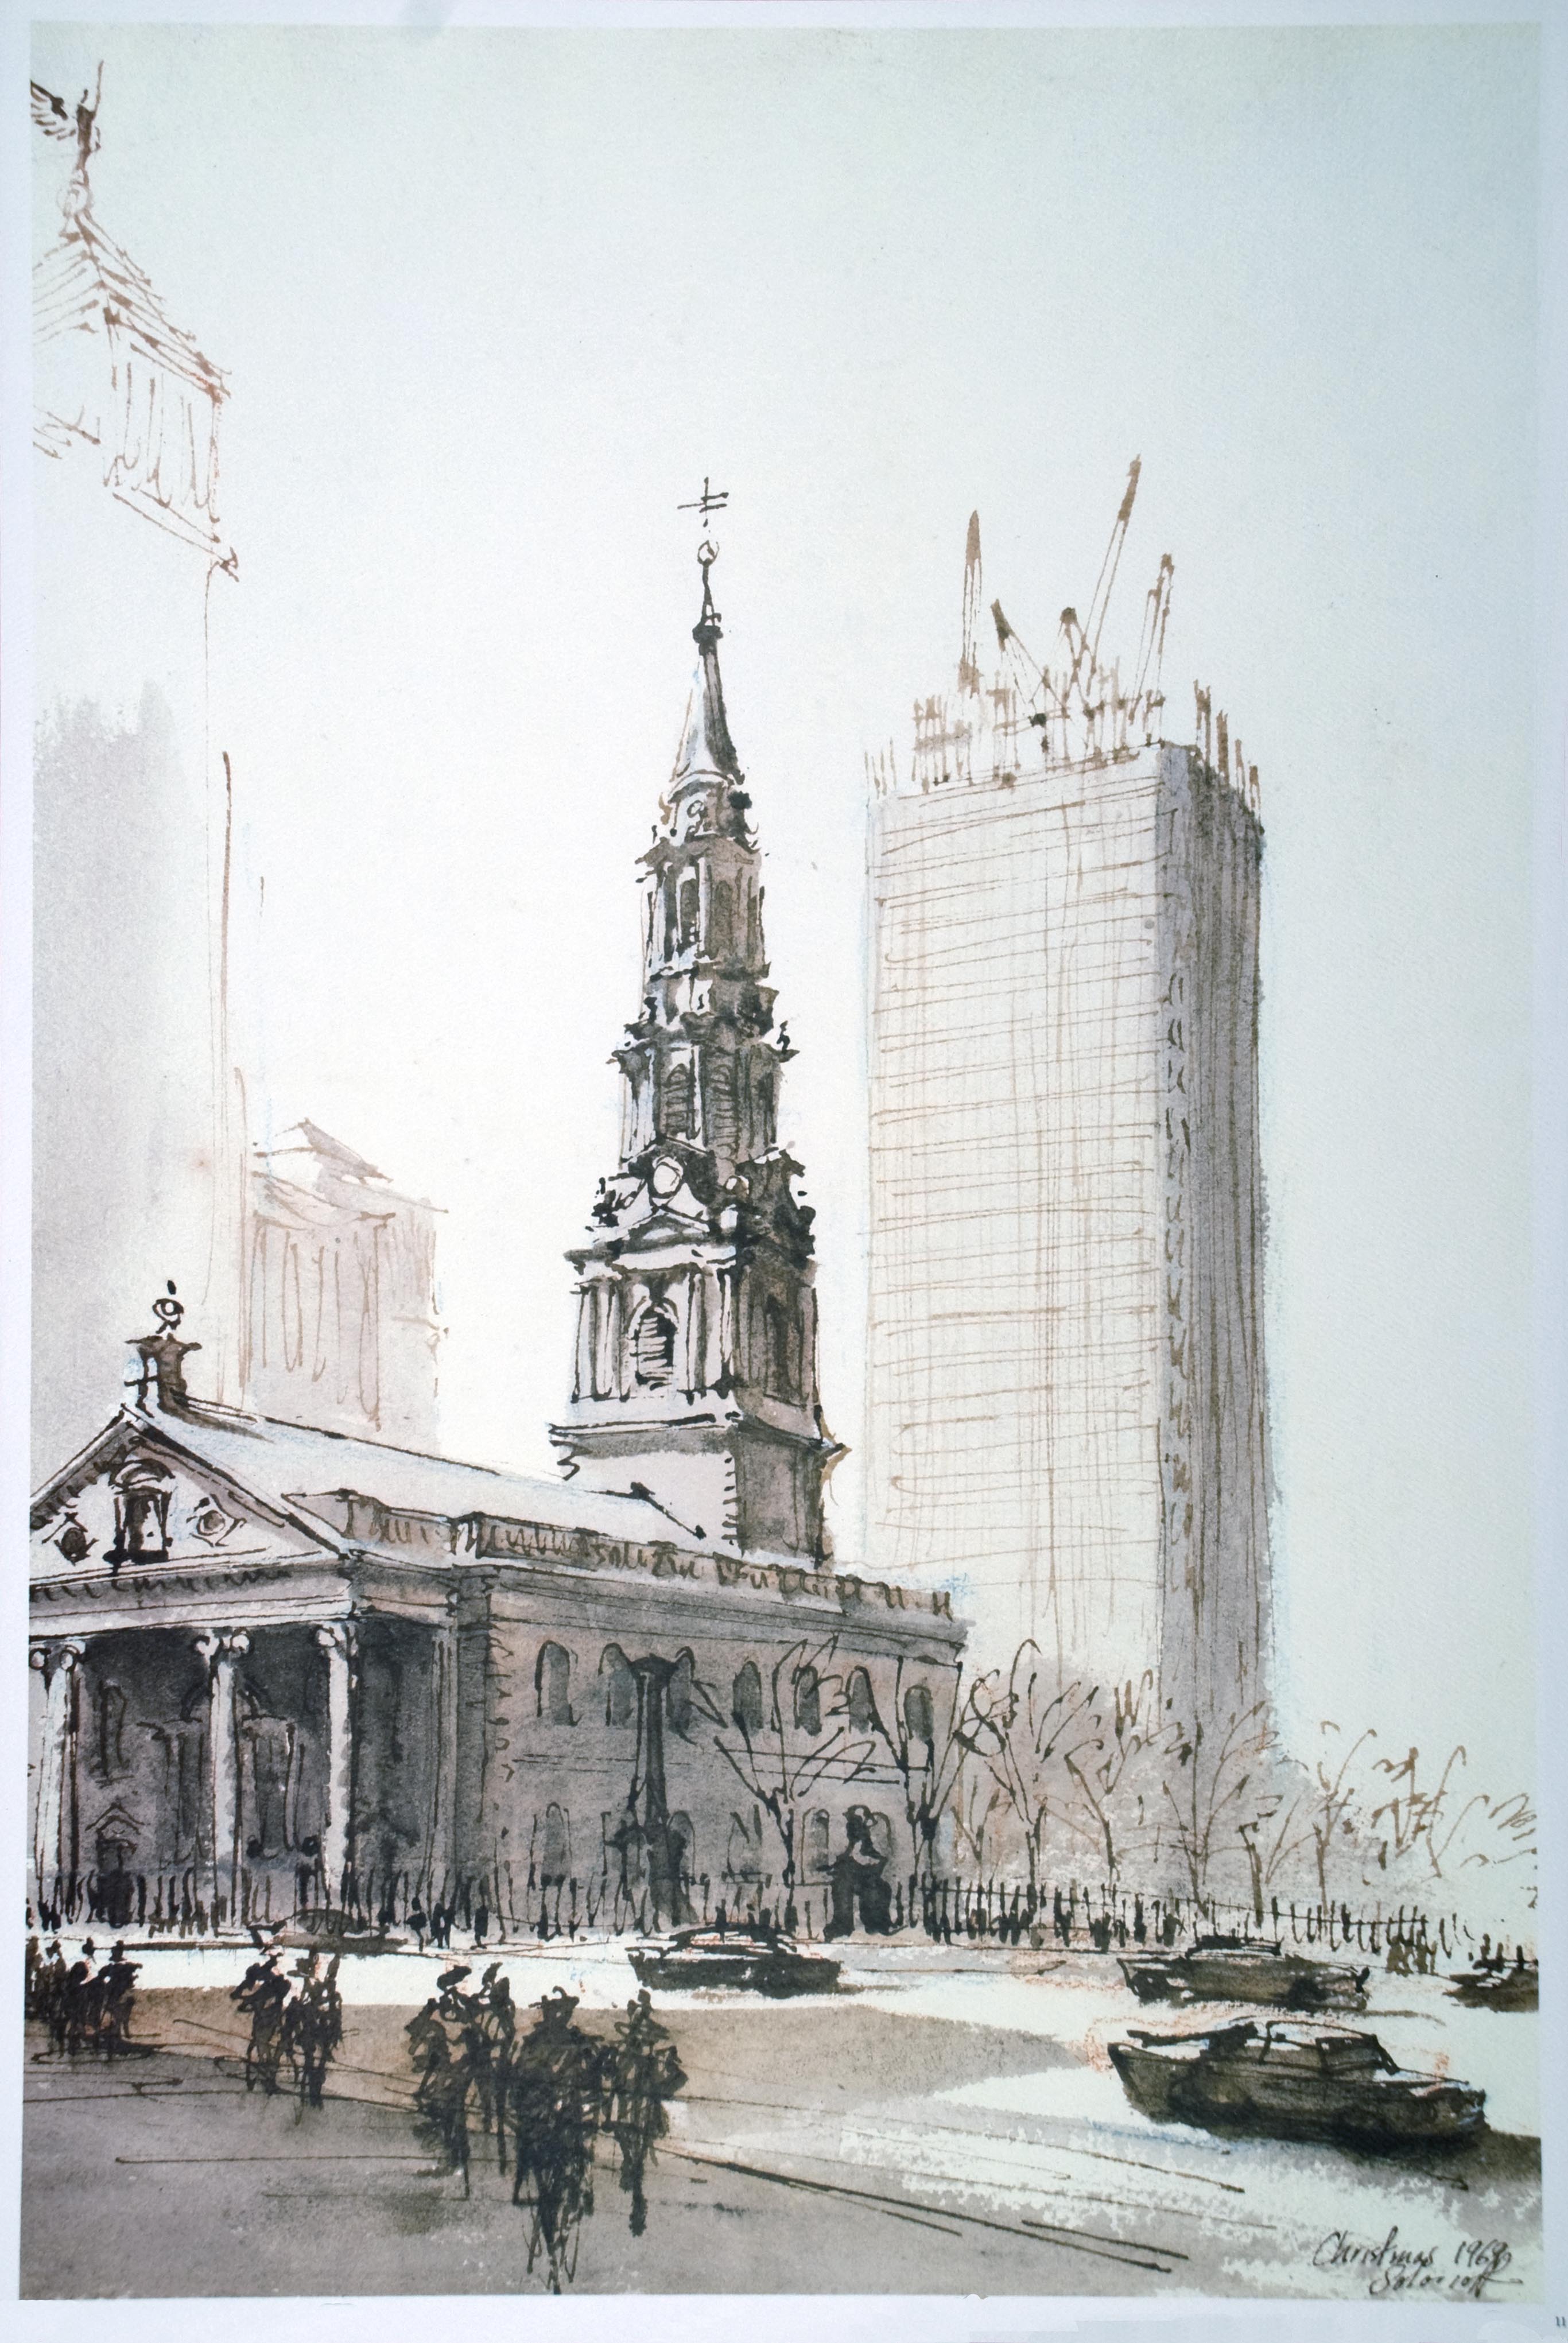 Print of illustration showing World Trade Center tower construction underway, with church in foreground